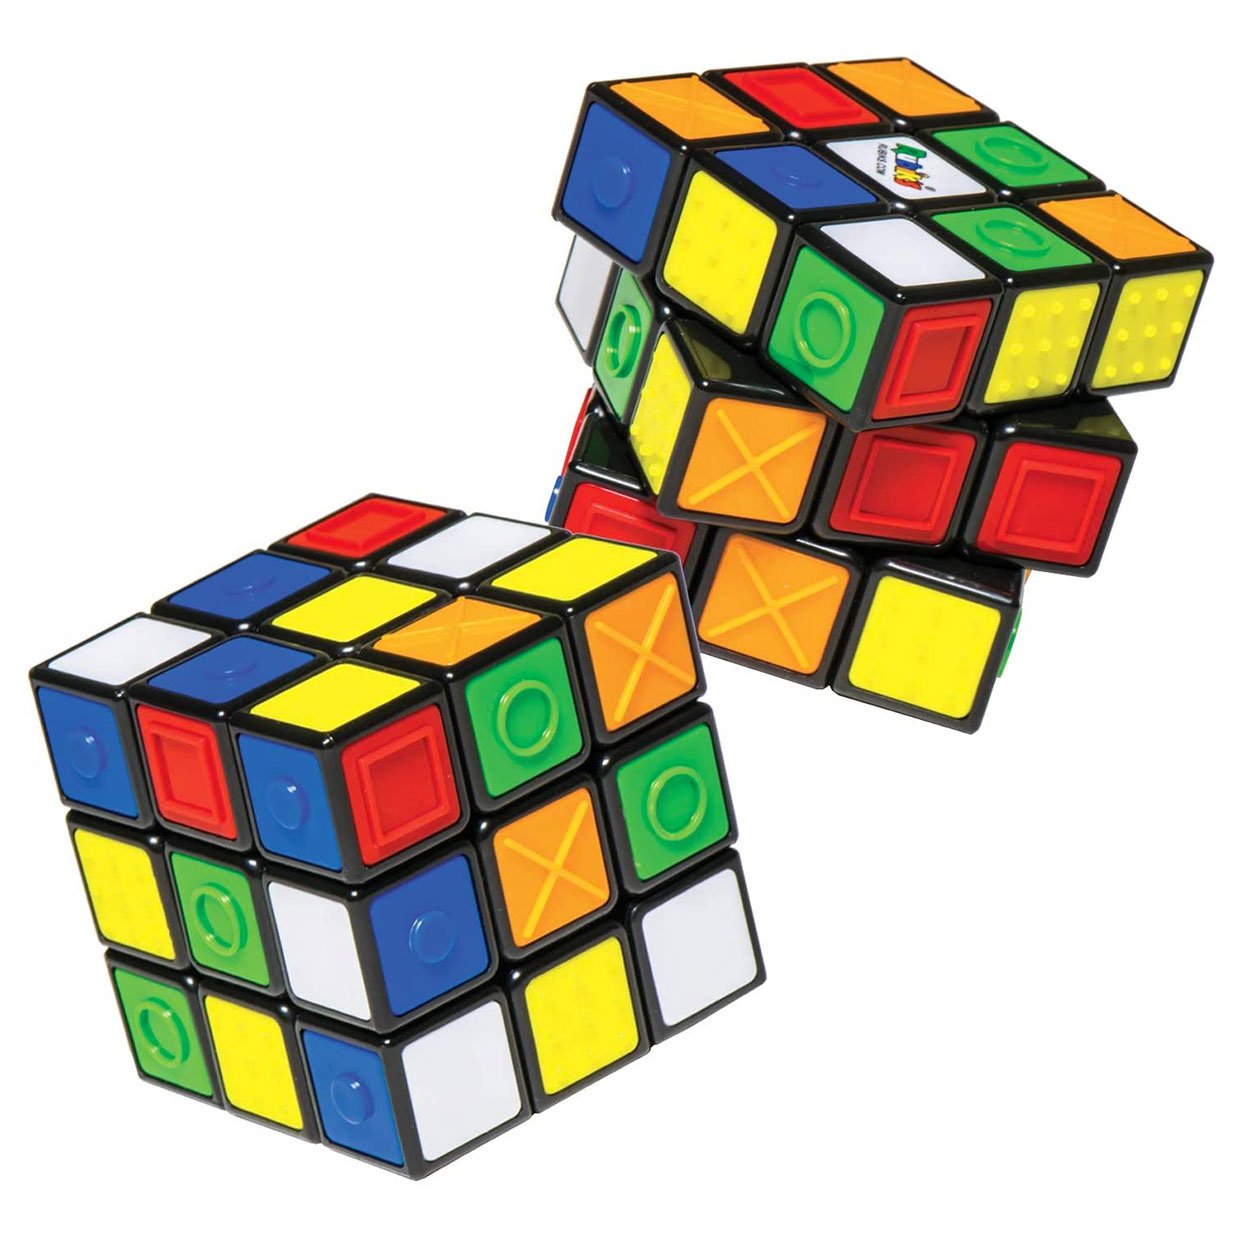 This Tactile Rubik's Cube Can Be Solved in the Dark